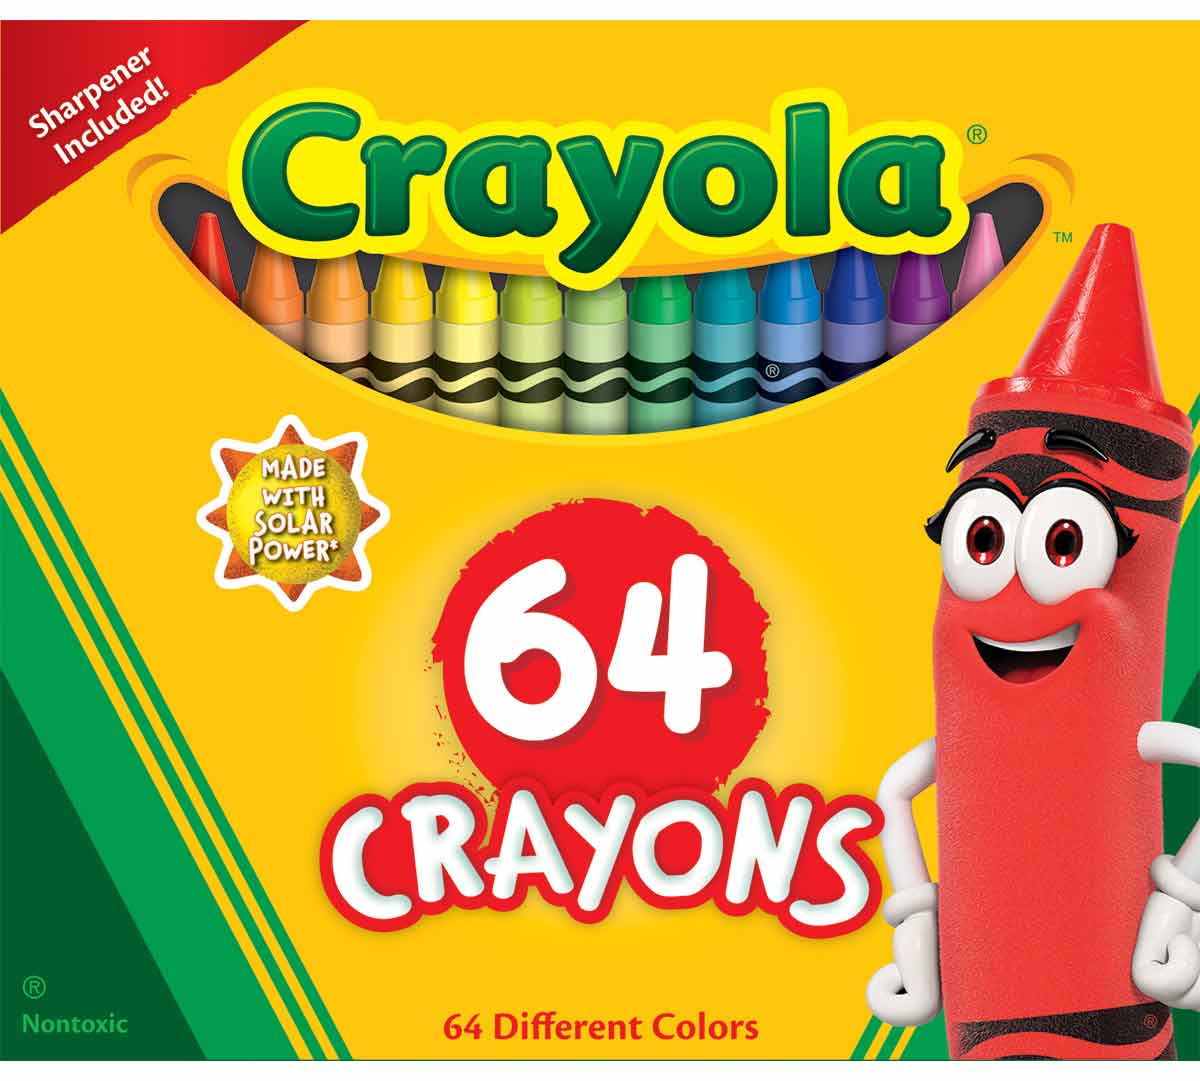 Crayola Ultimate Crayon Collection Coloring Set, Kids Indoor Activities at Home, Gift Age 3 Plus - 152 Count, Blue